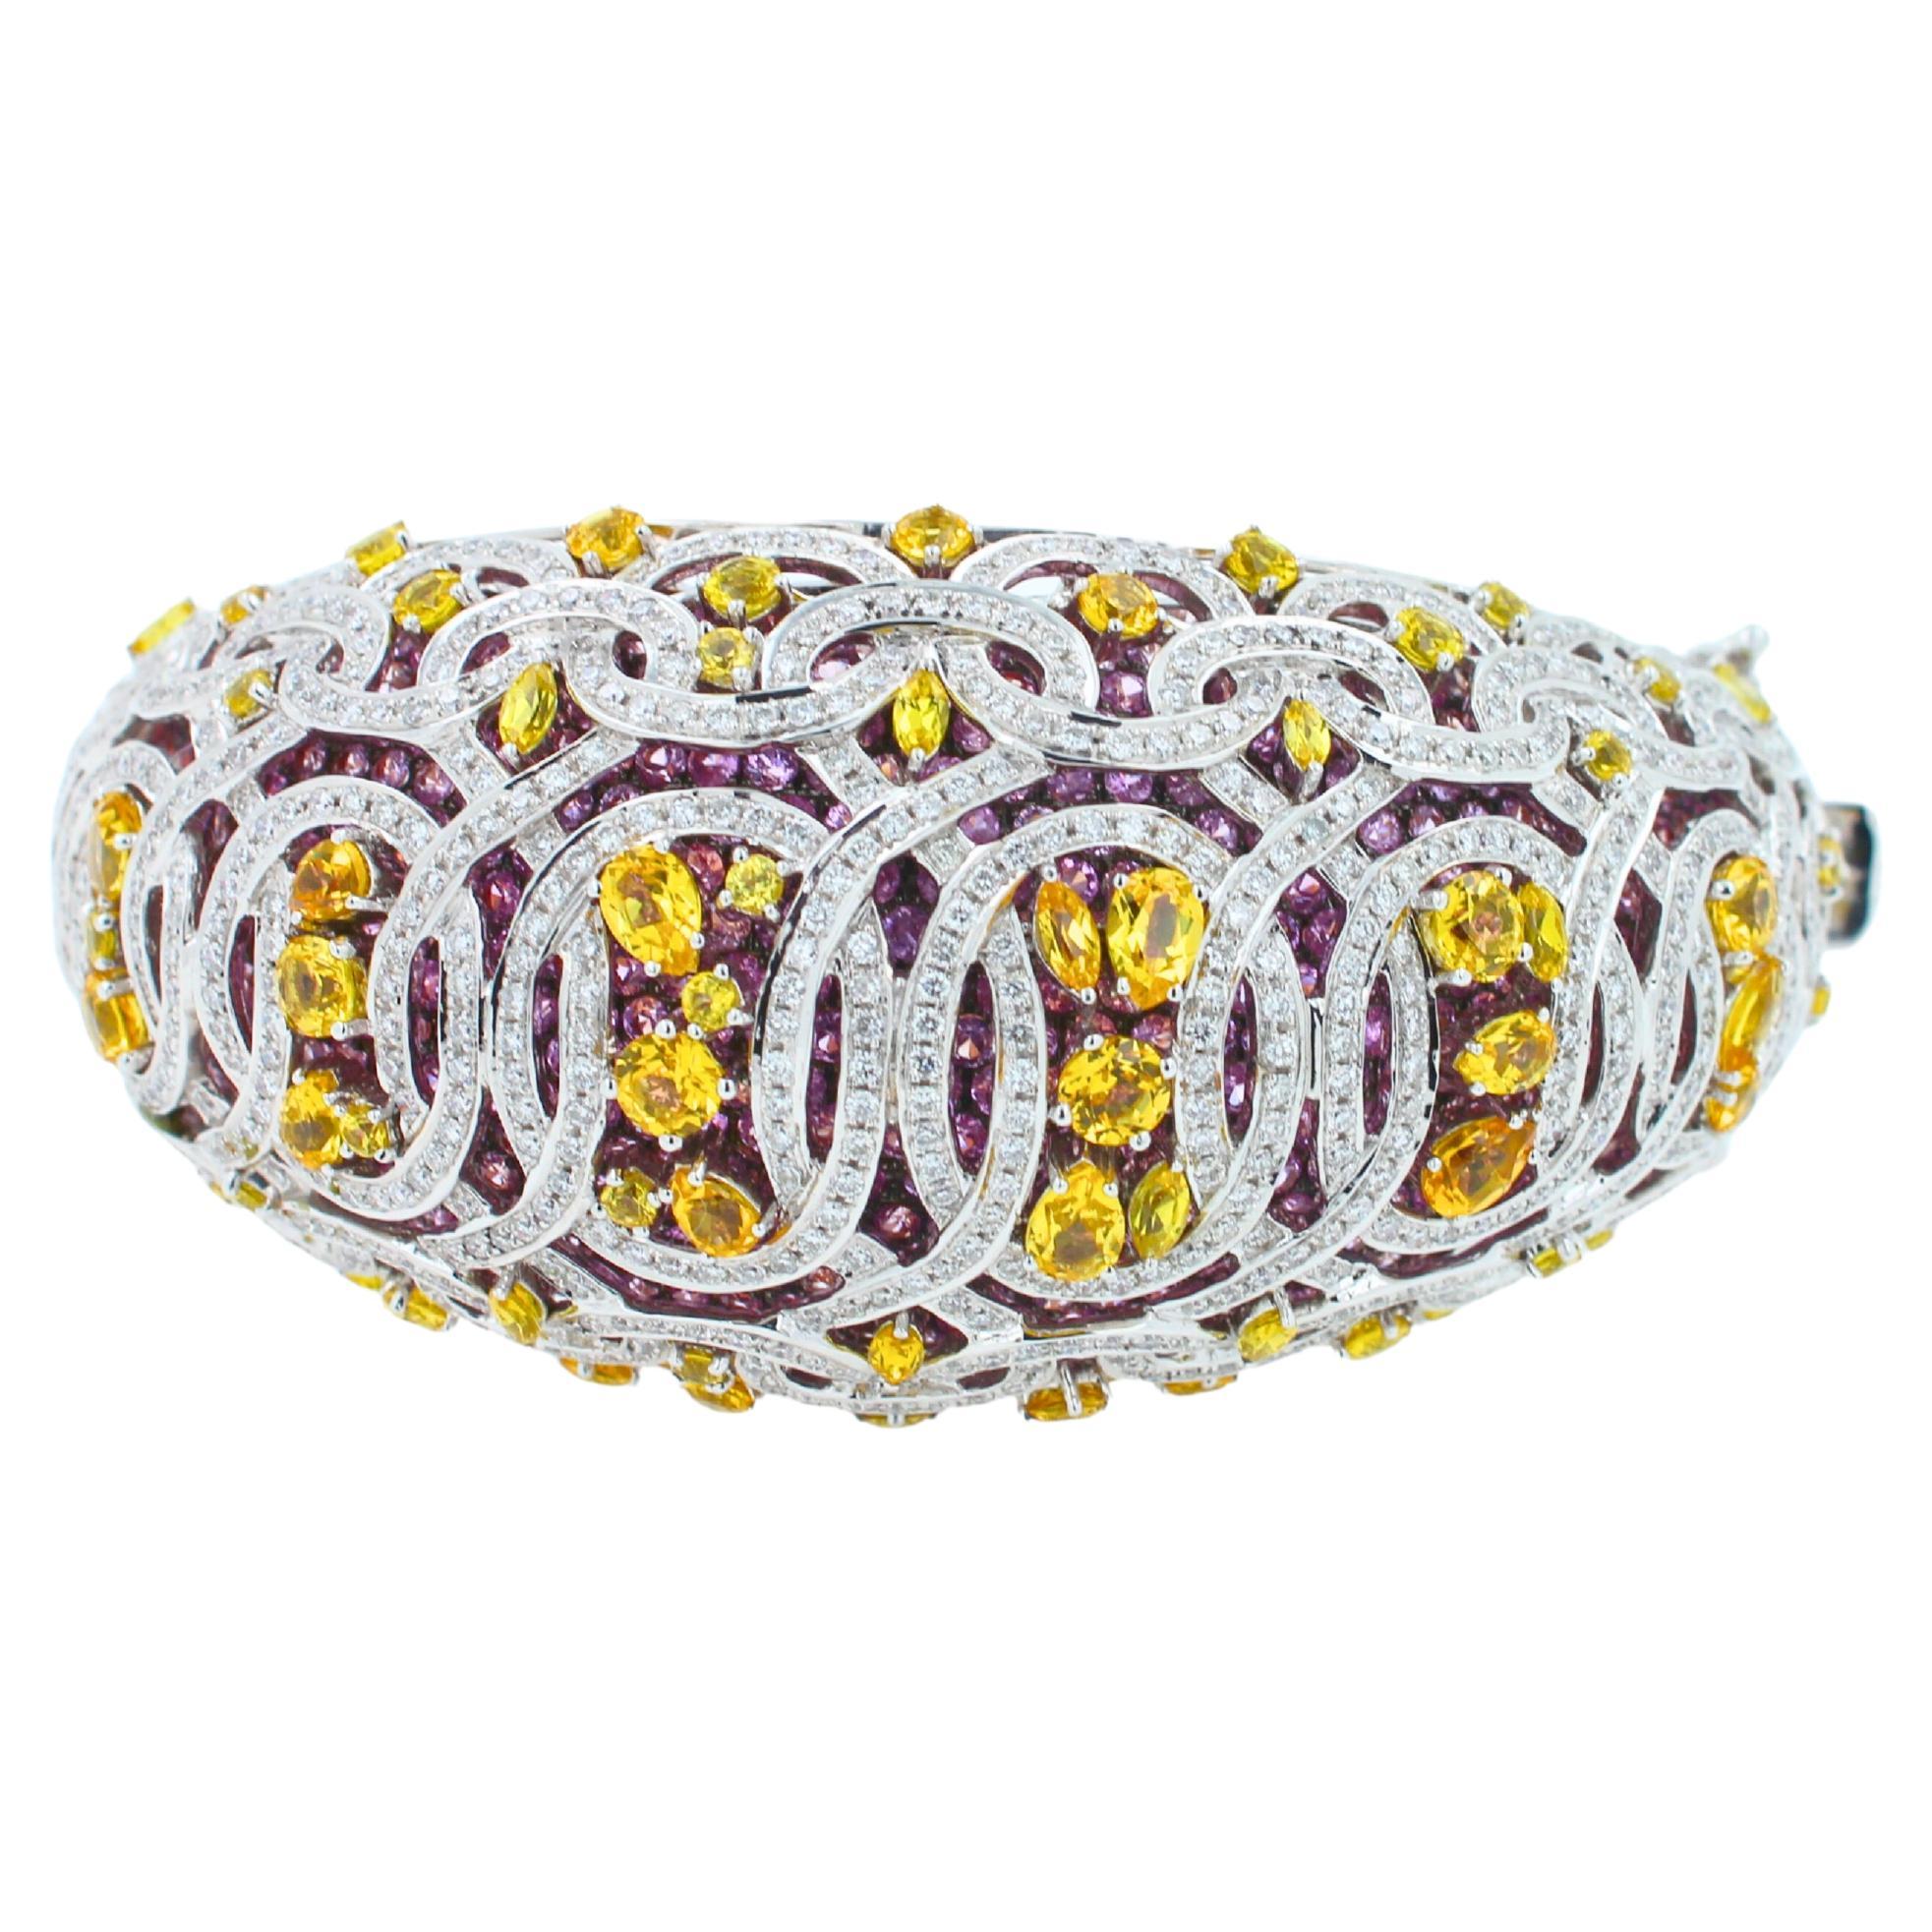 30.00 ctw Rose Pink Sapphires (Pave Set in the Inner Layer of the bracelet creating a one-a-kind pink shimmer & brilliance)
11.00 ctw Yellow Sapphires
8.00 ctw Diamonds 
18K White Gold & Rose Gold
Rain & Curved Nature Motifs in the Metalwork
Very